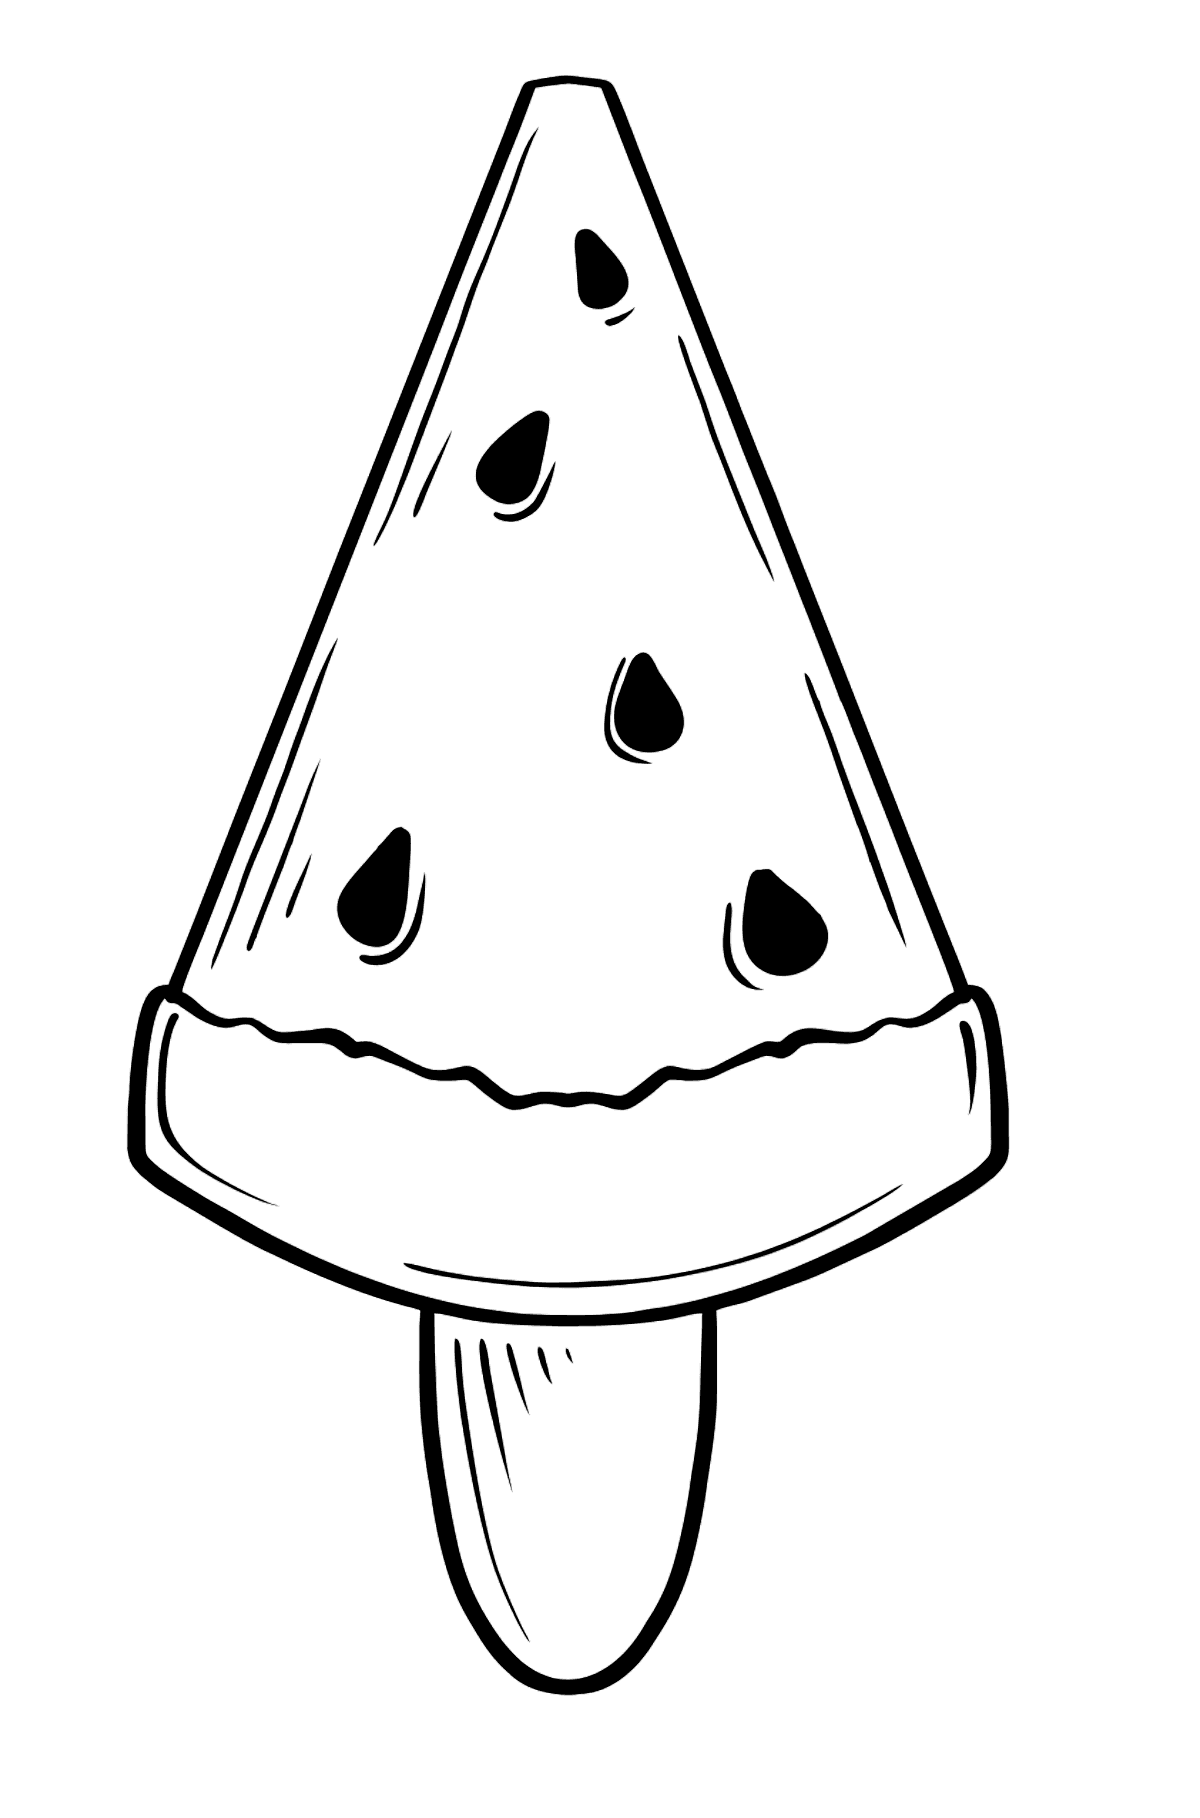 Watermelon Ice Cream Popsicle coloring page - Coloring Pages for Kids